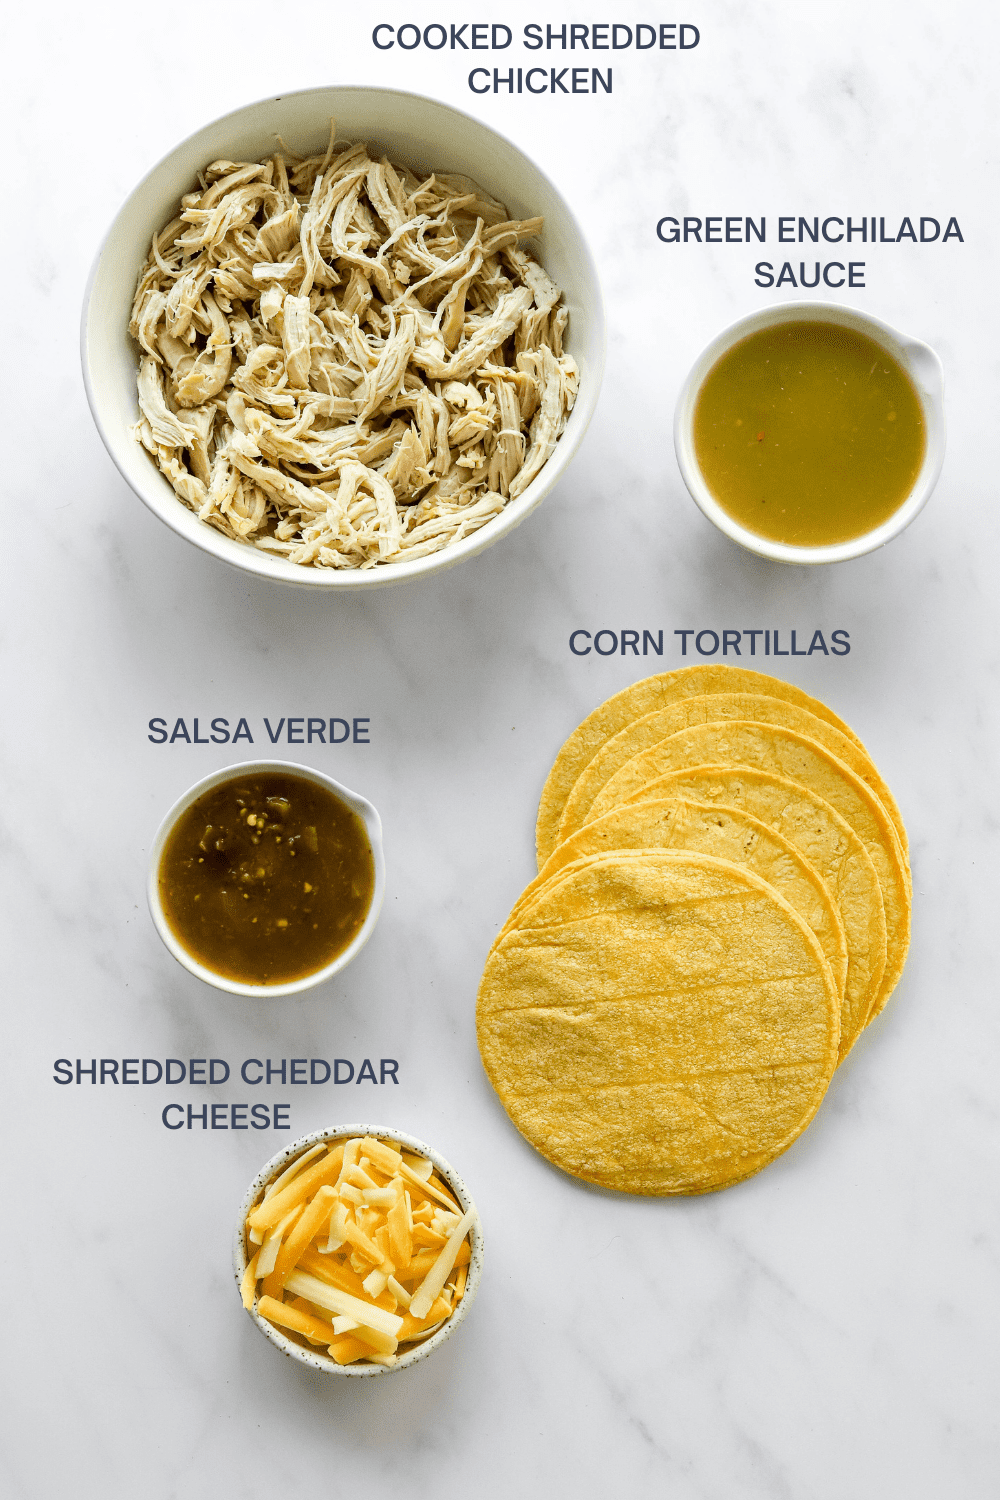 Shredded chicken in a round bowl with a bowl of green enchilada sauce next to it and a bowl of salsa verde, corn tortillas and a bowl of shredded cheese in front of it. 